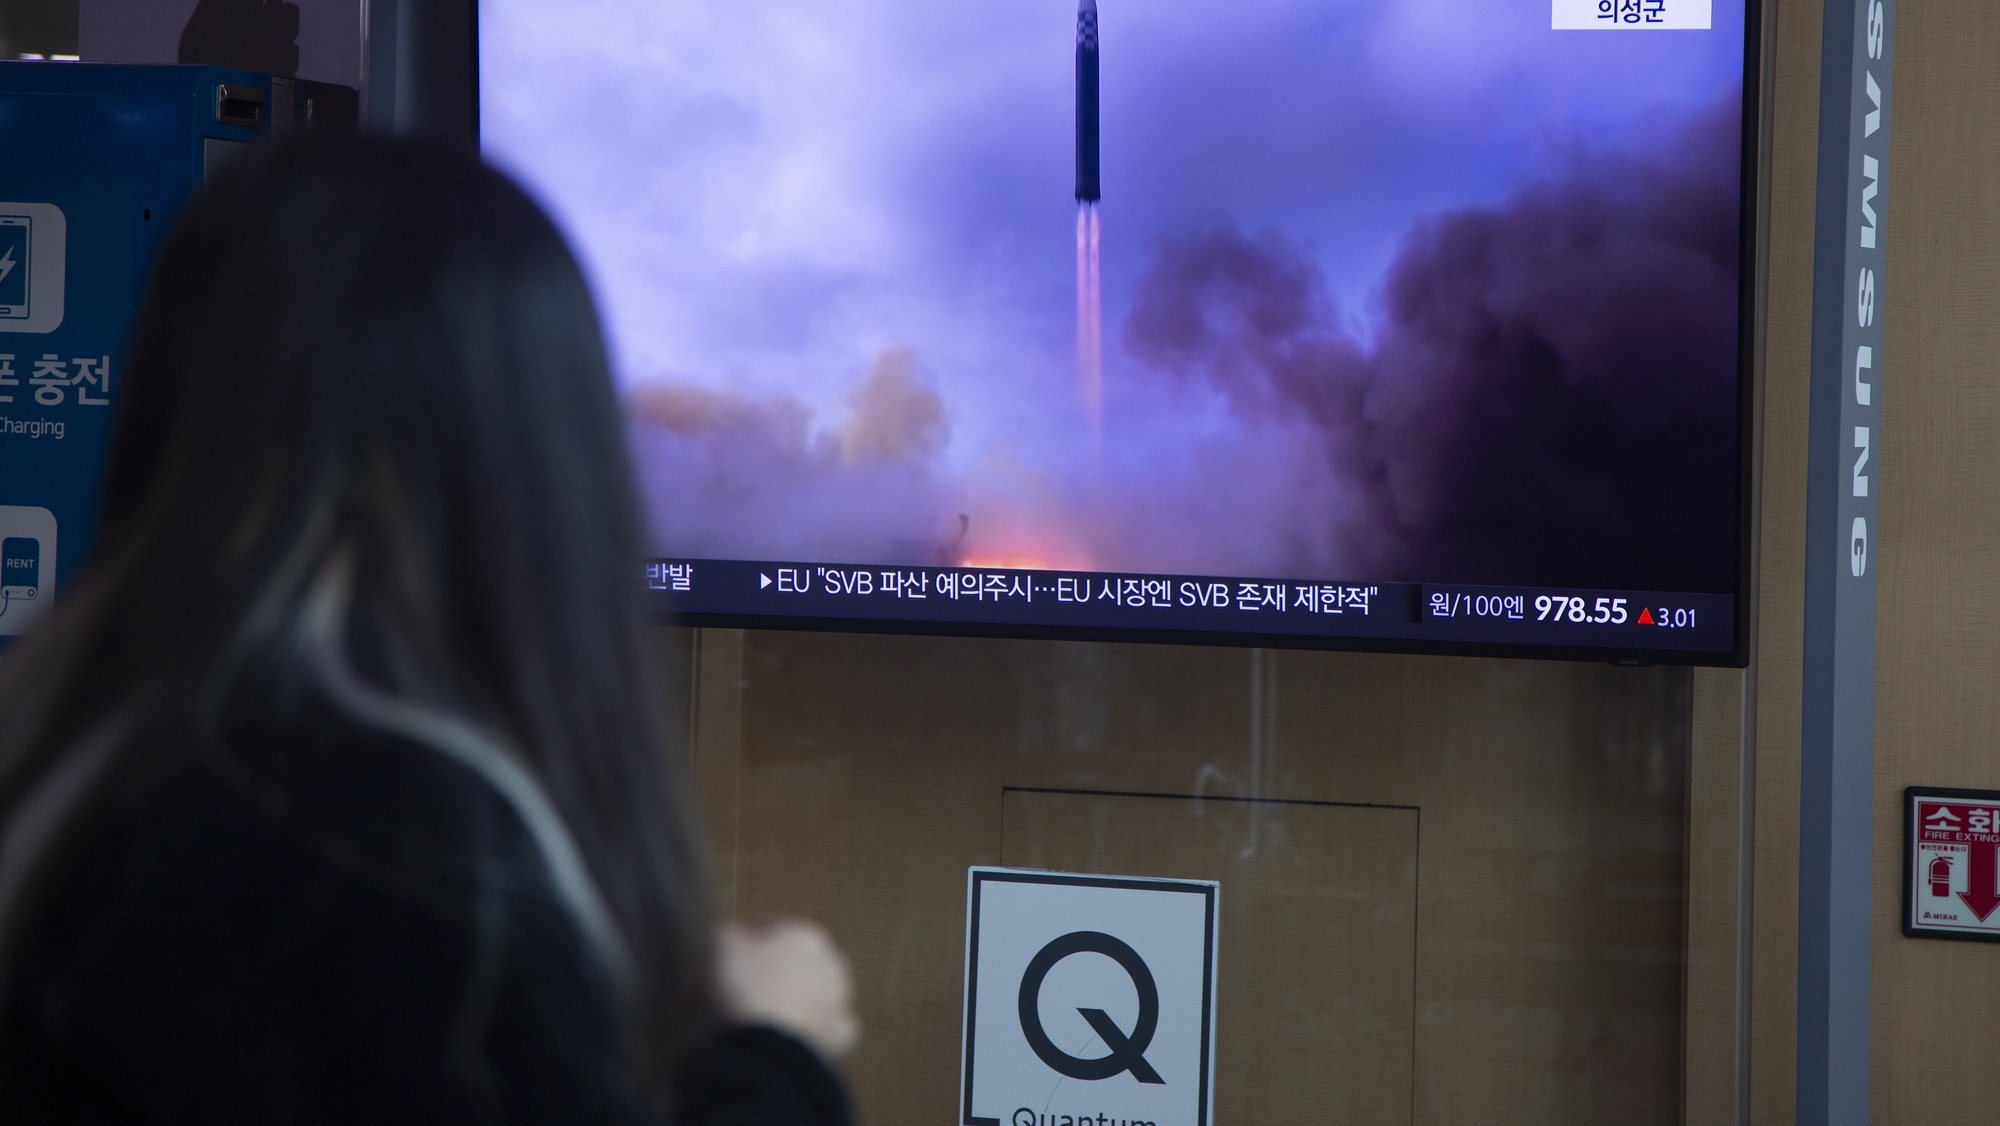 epa10521597 A woman watches the news at a station in Seoul, South Korea, 14 March 2023. According to South Korea&#039;s Joint Chiefs of Staff (JCS), in the early morning of 14 March, North Korea launched two short-range ballistic missiles into the East Sea, amid US-South Korean joint military drills.  EPA/JEON HEON-KYUN